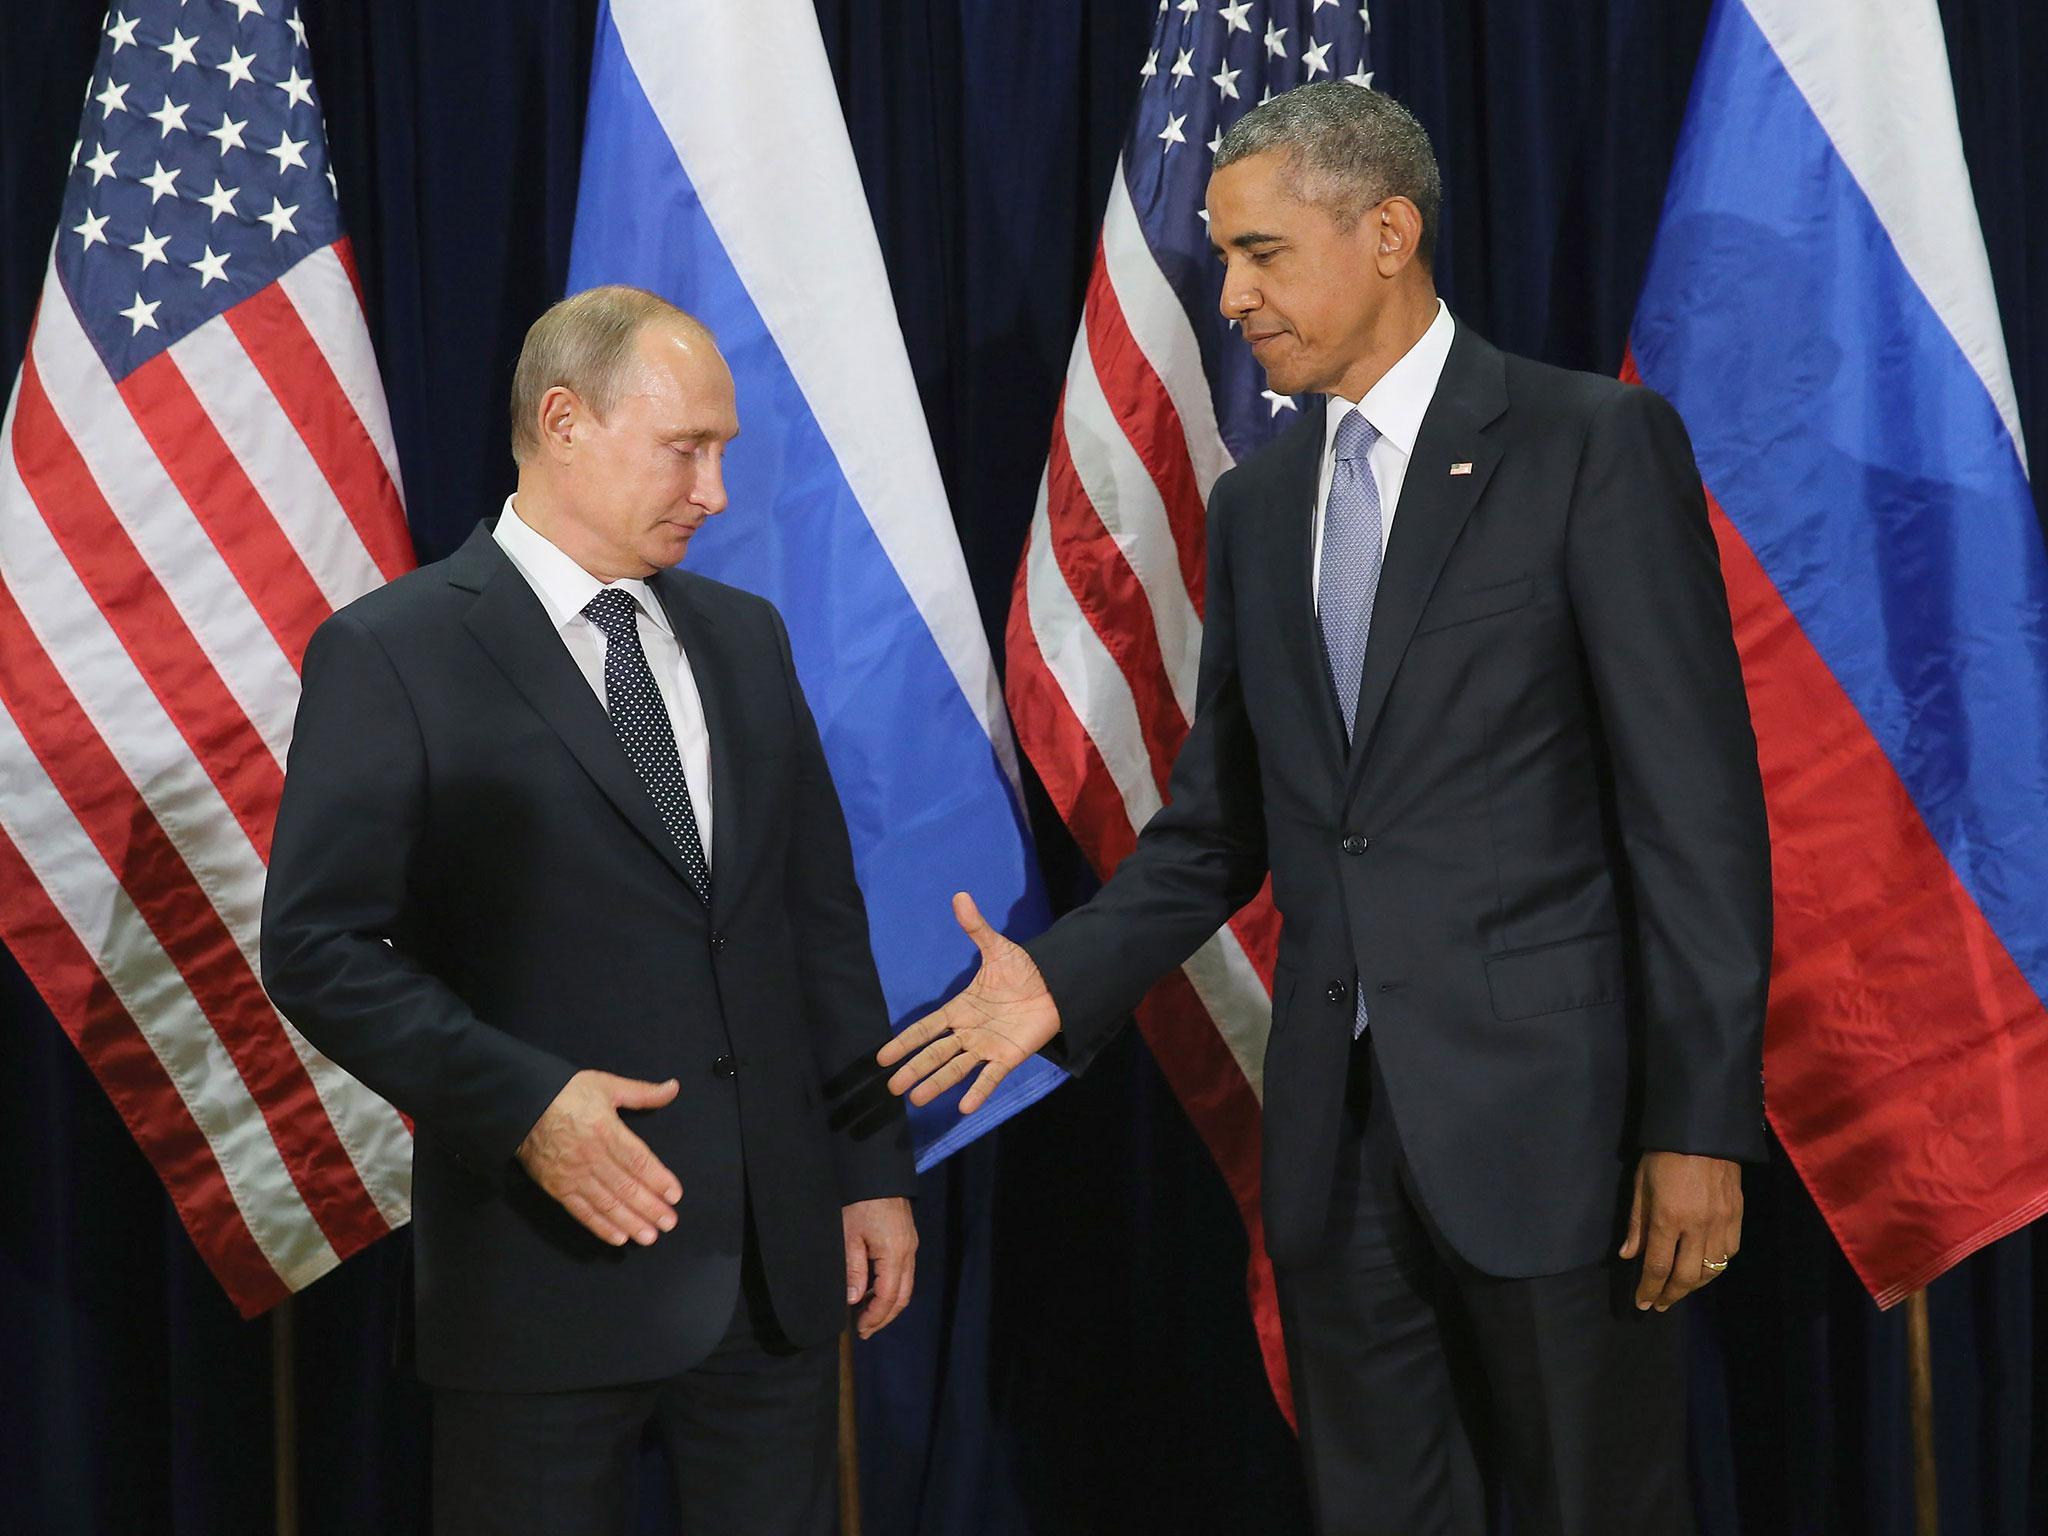 Russian President Vladimir Putin and US President Barack Obama shake hands for the cameras before the start of a bilateral meeting at the United Nations headquarters 28 September, 2015, in New York City